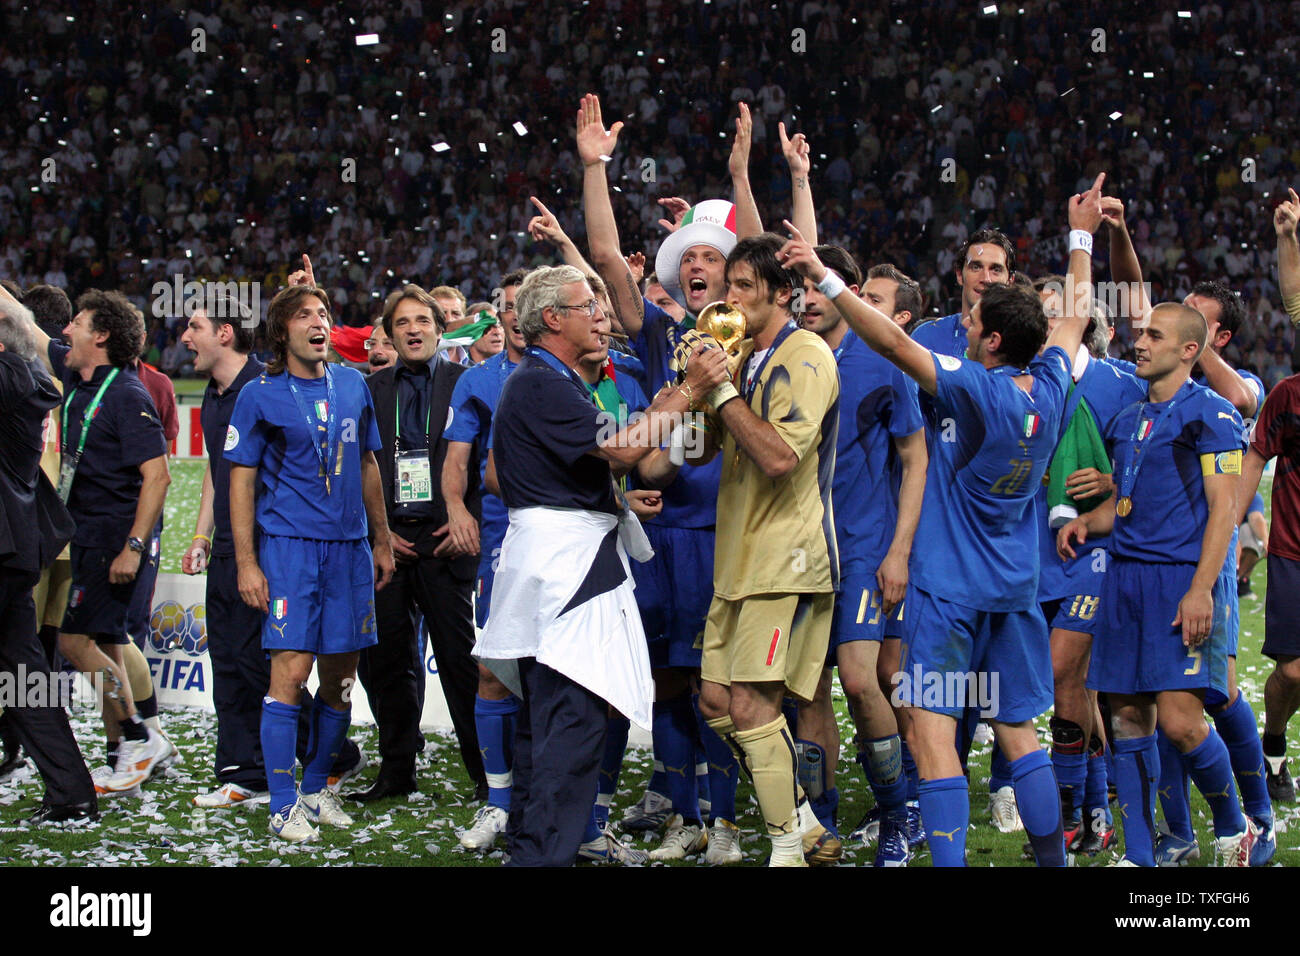 Italian players celebrate the World title as Giunluigi Buffon and Italy's coach Marcello Lippi hold the trophy at the World Cup soccer final in Berlin on July 9, 2006. Italy defeated France 5-3.   (UPI Photo/Arthur Thill) Stock Photo